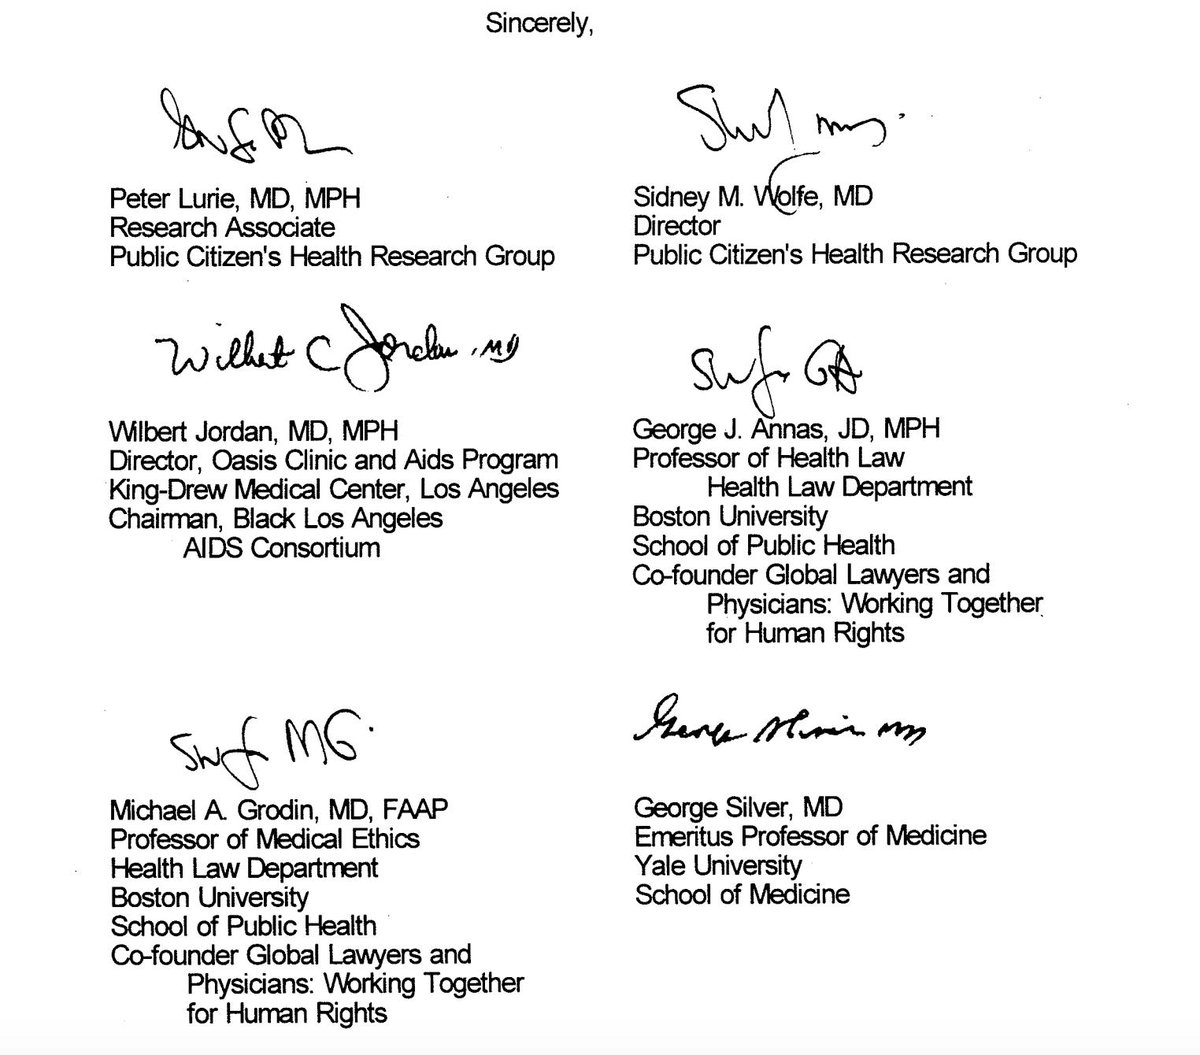 Just so you know, the signatories of this letter aren't conspiracy theory nutjobs!They are professors, doctors, biologists and other highly acclaimed researchers